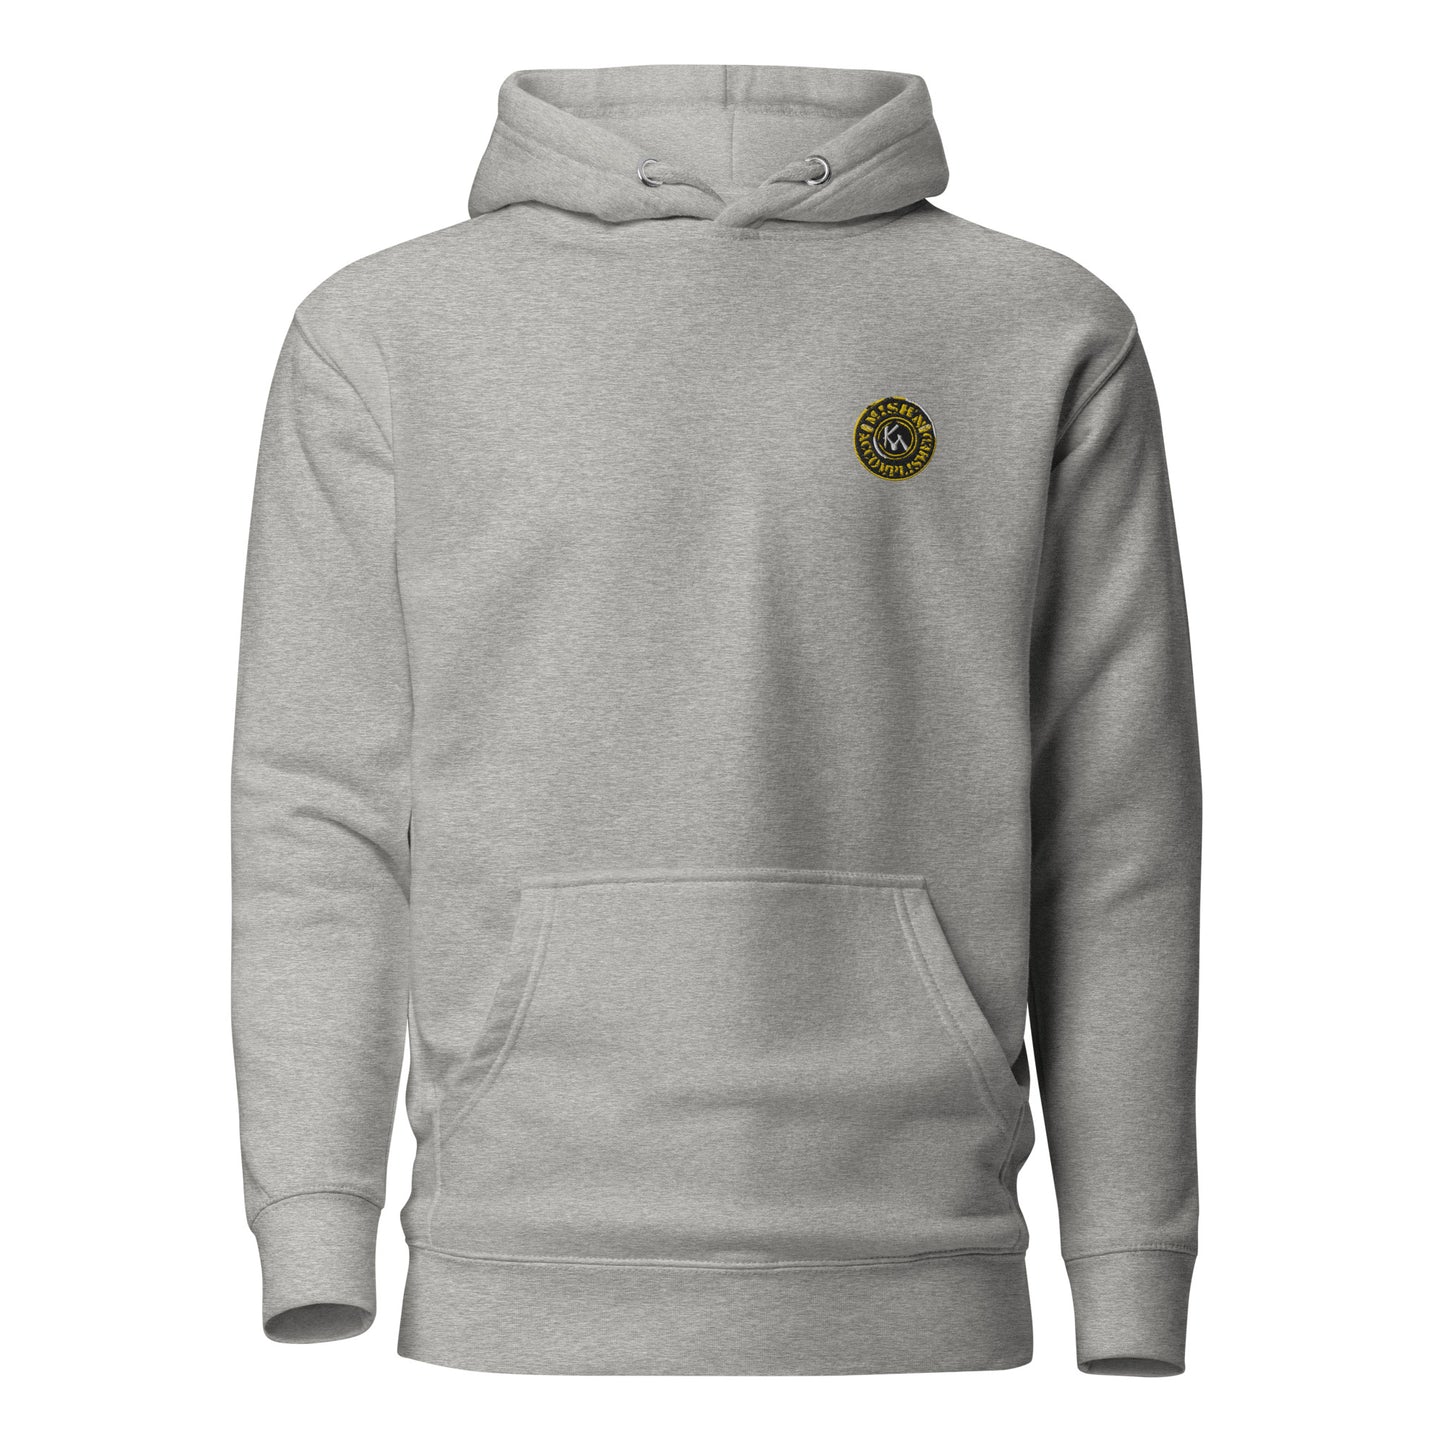 MIKE AND MISH GOLD Unisex Hoodie